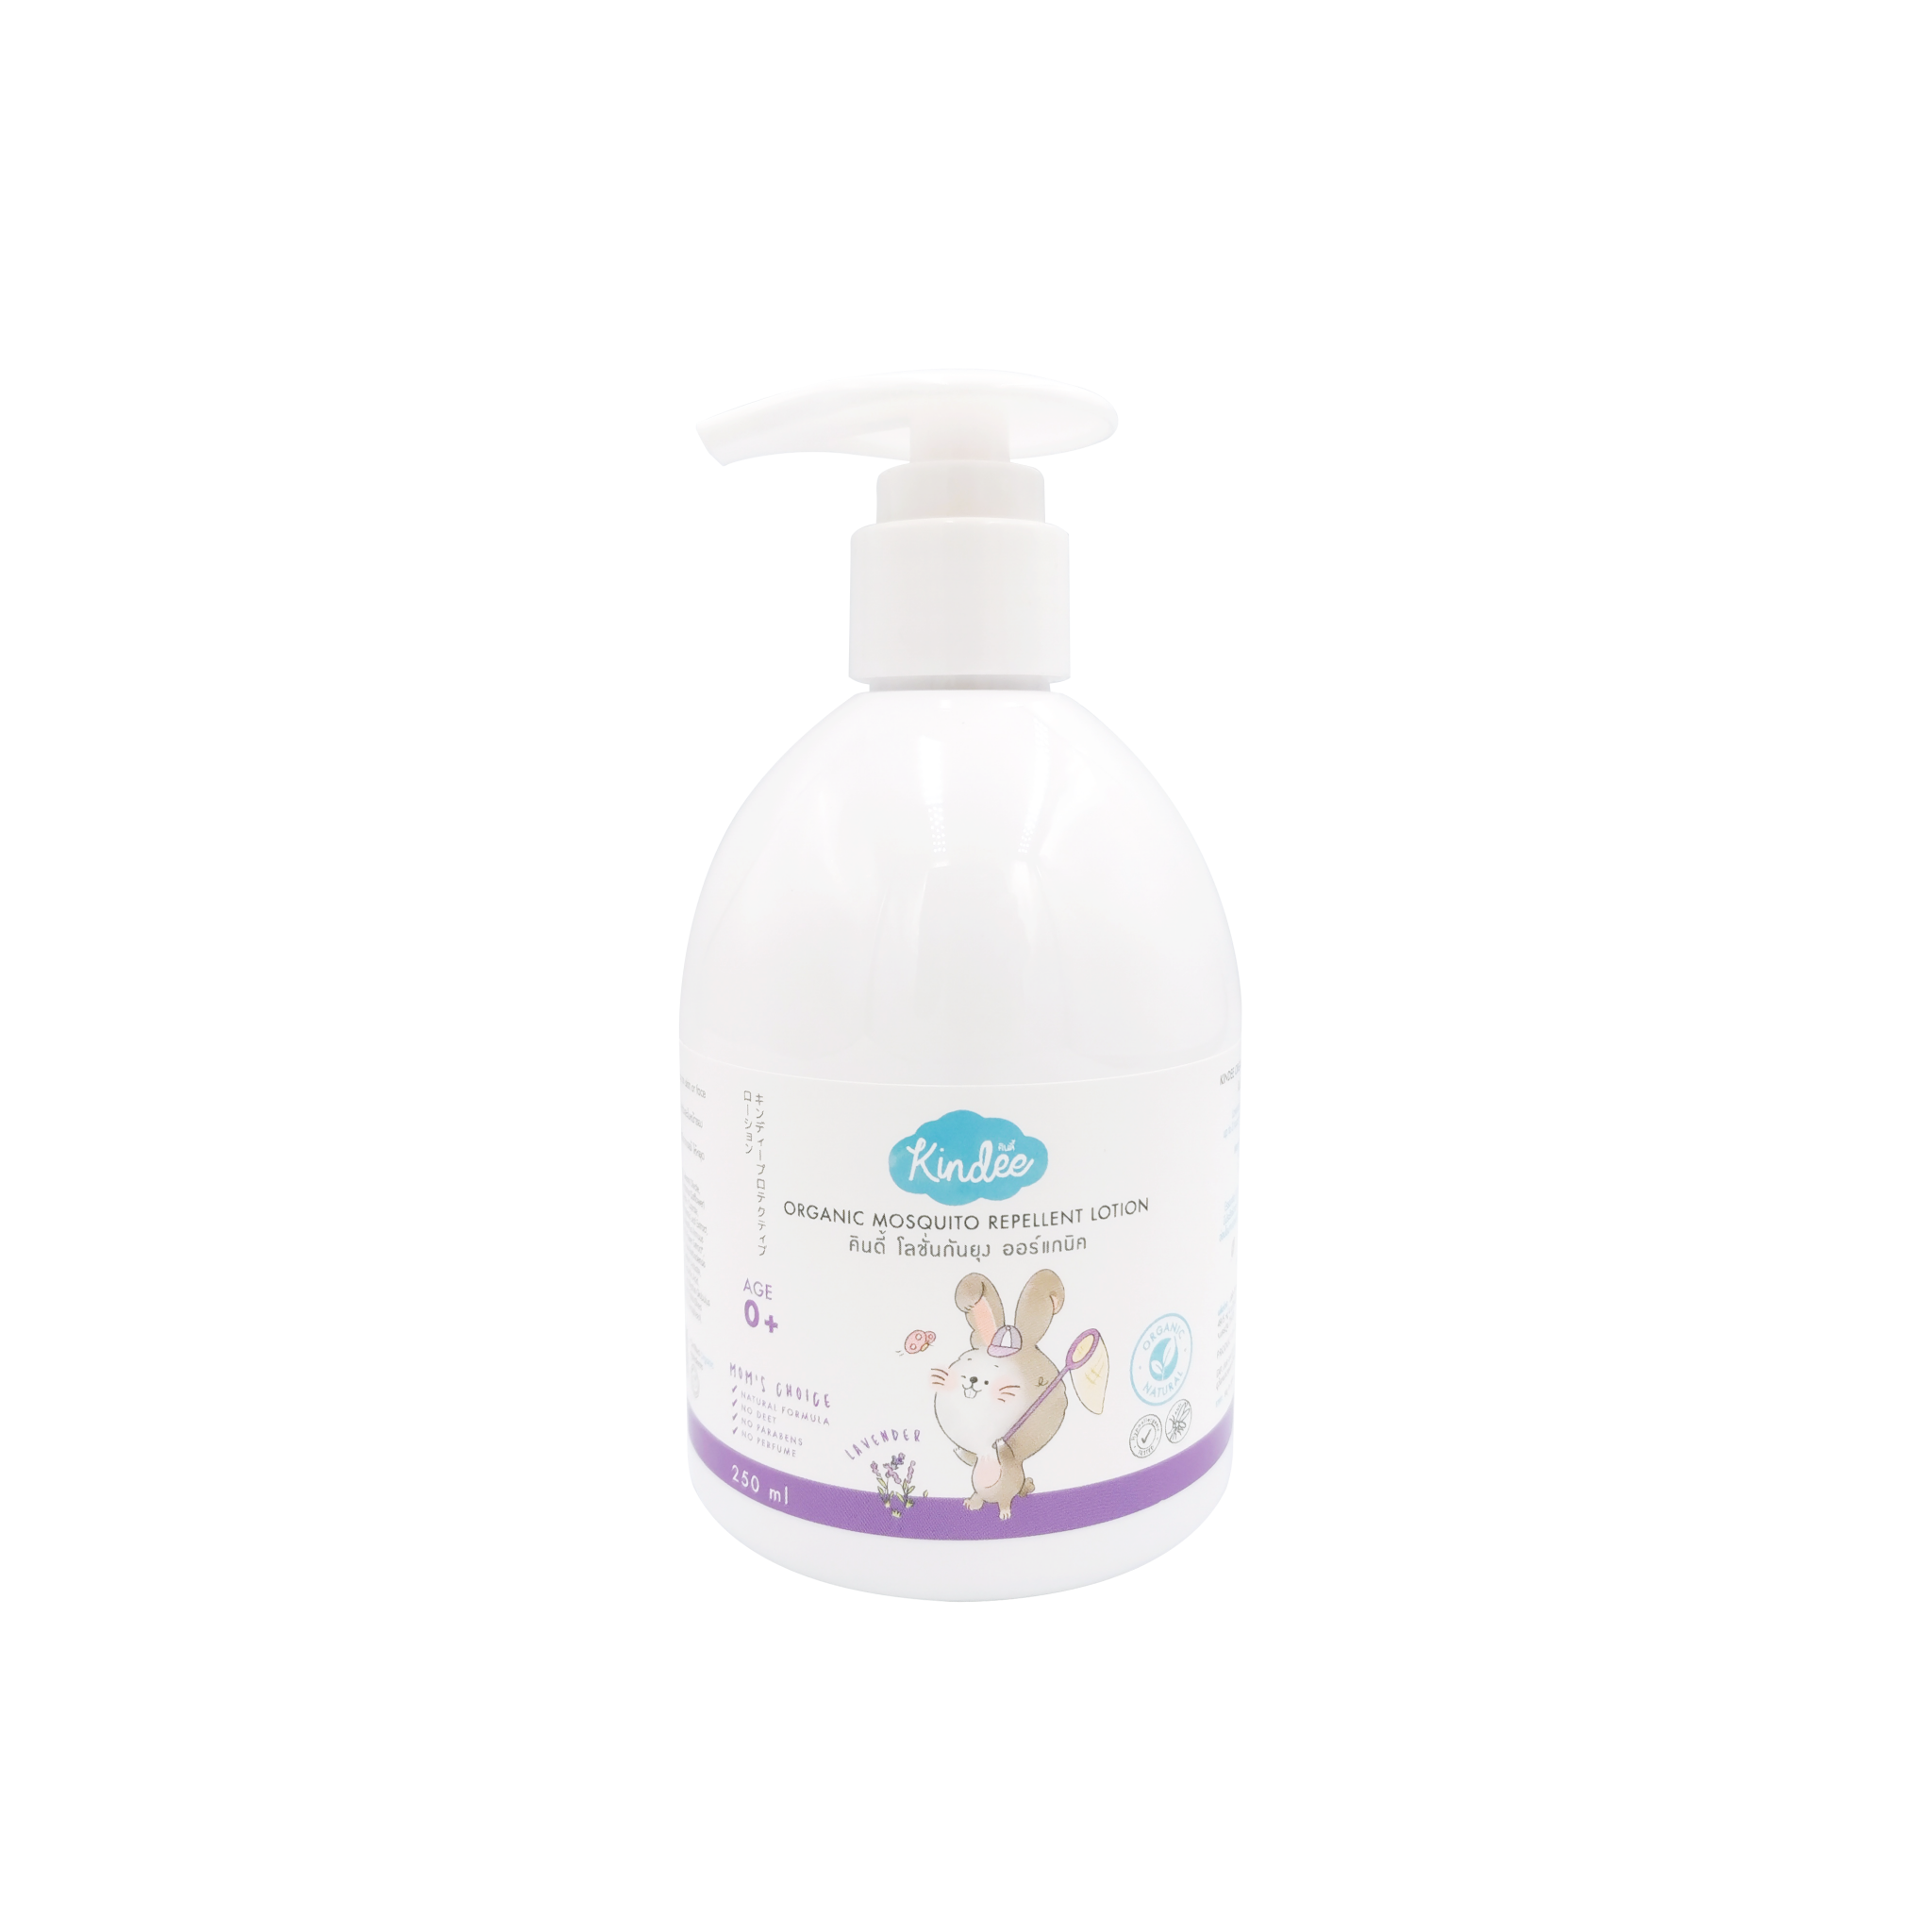 Kindee Organic Mosquito Repellent Lotion 0 250ml Kindee